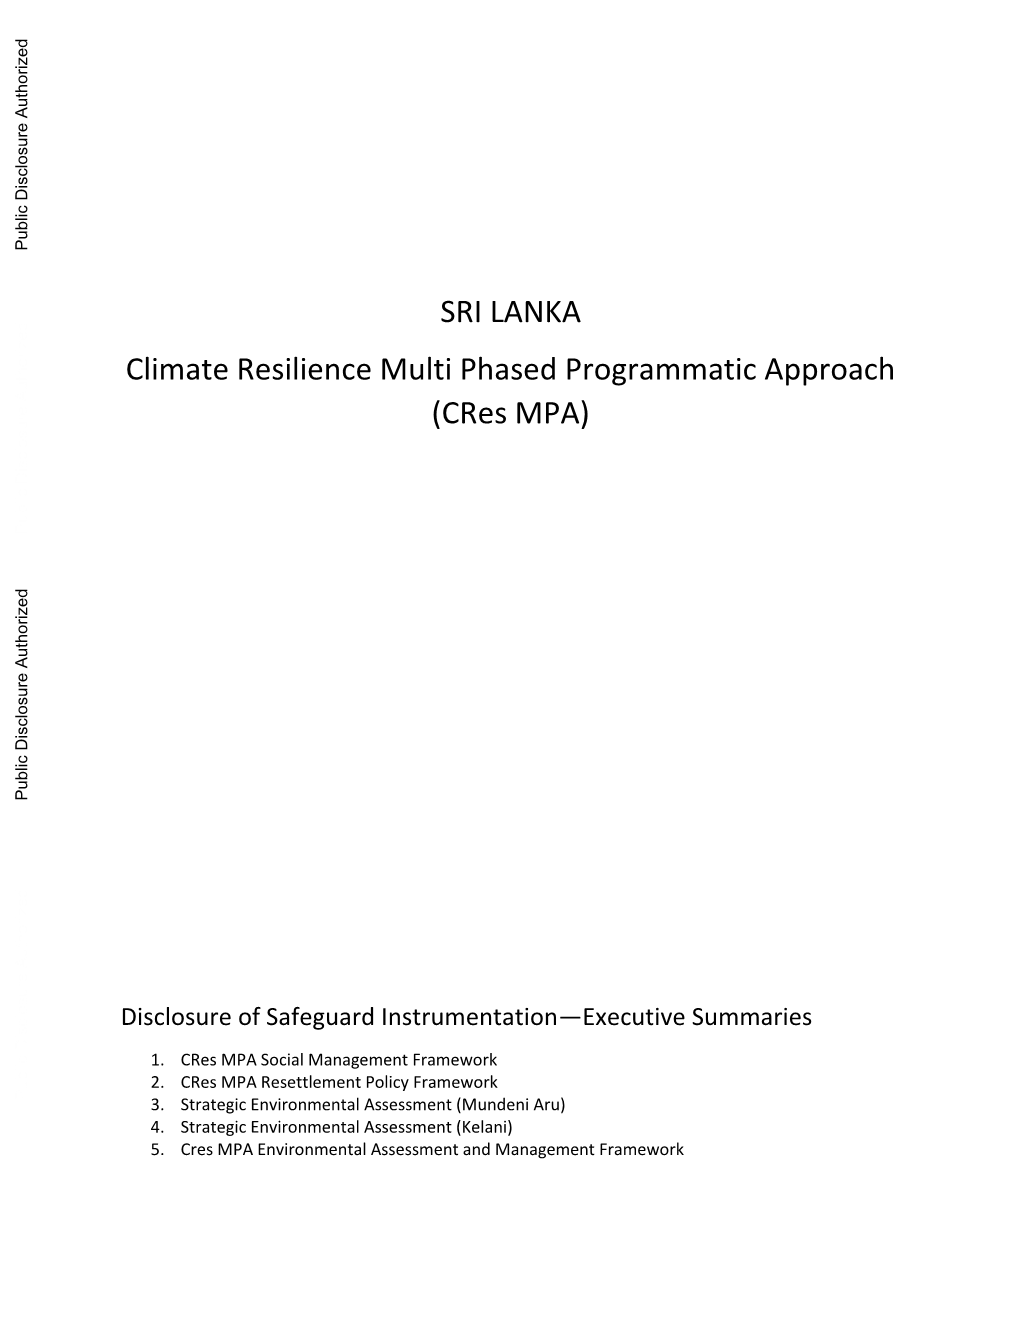 SRI LANKA Climate Resilience Multi Phased Programmatic Approach (Cres MPA)